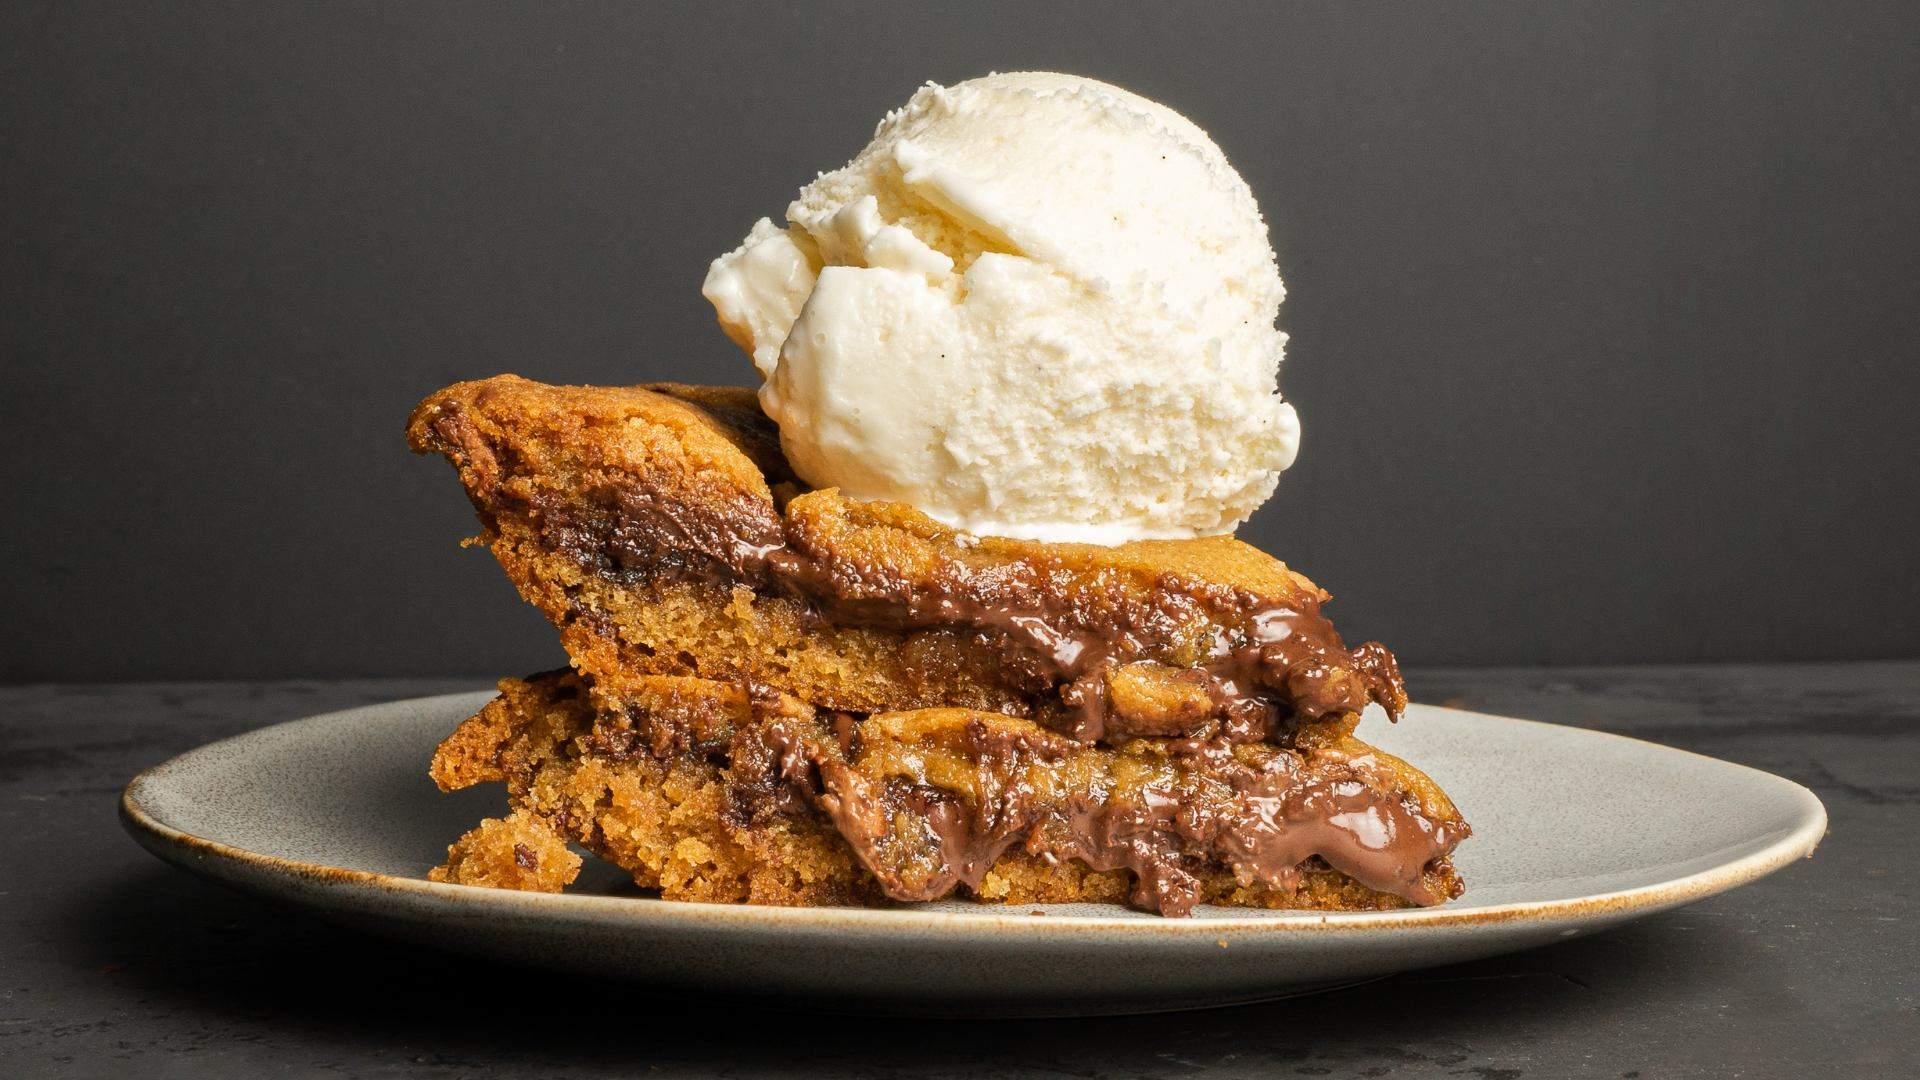 Gelato Messina Is Releasing a New Bake-At-Home Cookie Pie with a Gooey Chocolate Centre